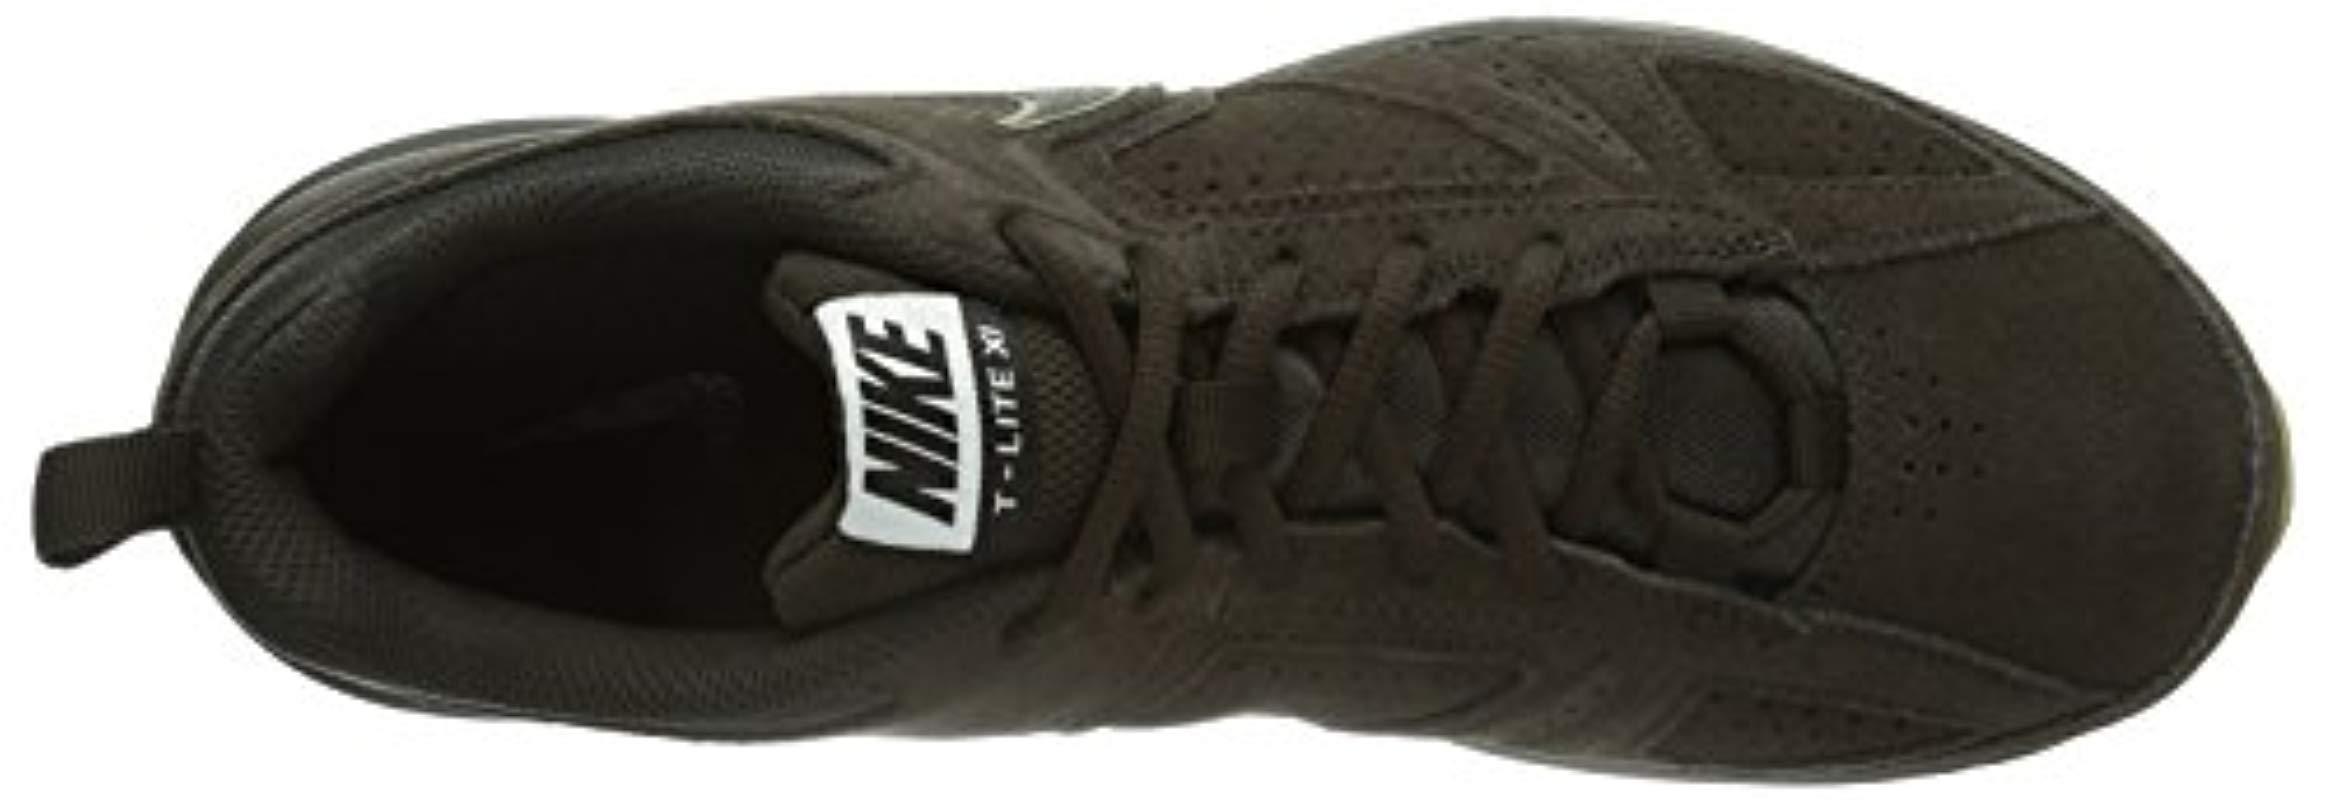 Nike T Lite Xi Nbk Running Shoes in Brown for Men - Lyst